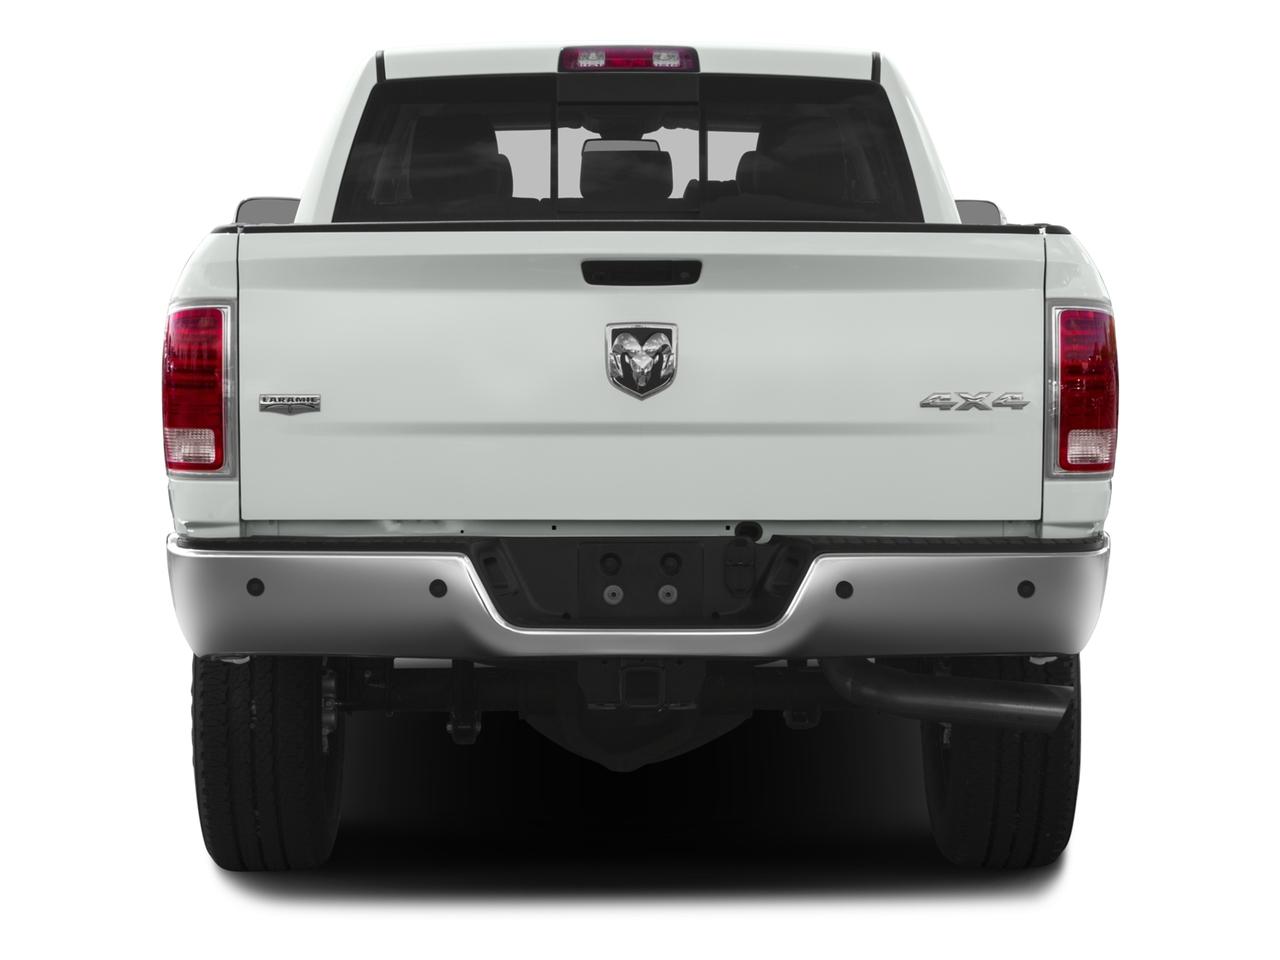 2016 Ram 3500 Vehicle Photo in Ft. Myers, FL 33907